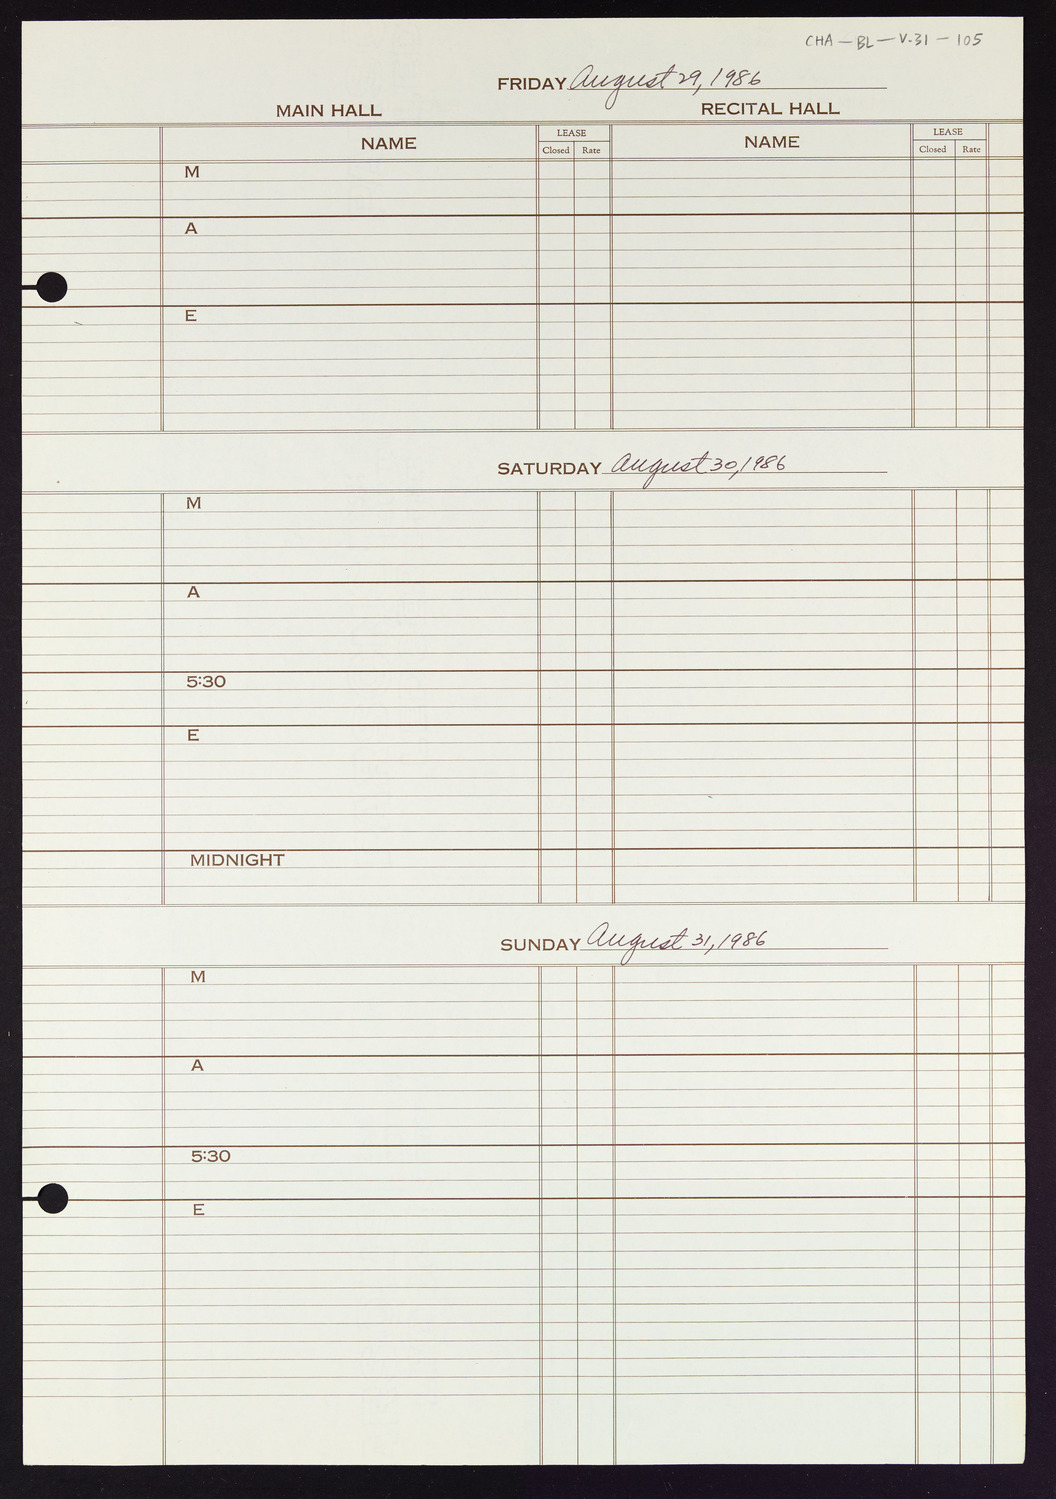 Carnegie Hall Booking Ledger, volume 31, page 105